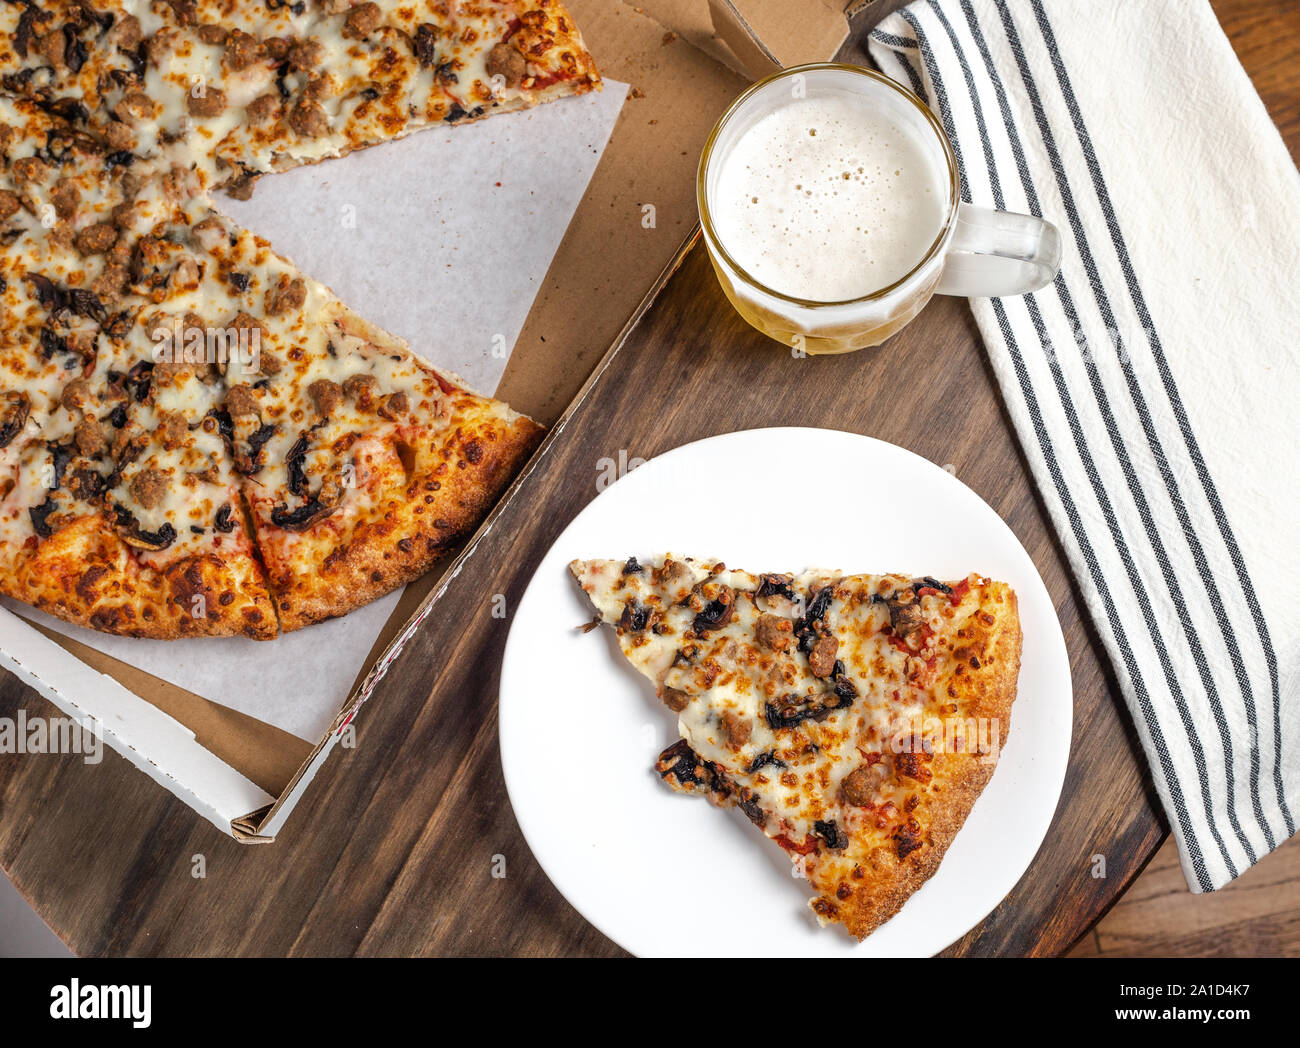 Tasty meal with pizza and beer Stock Photo